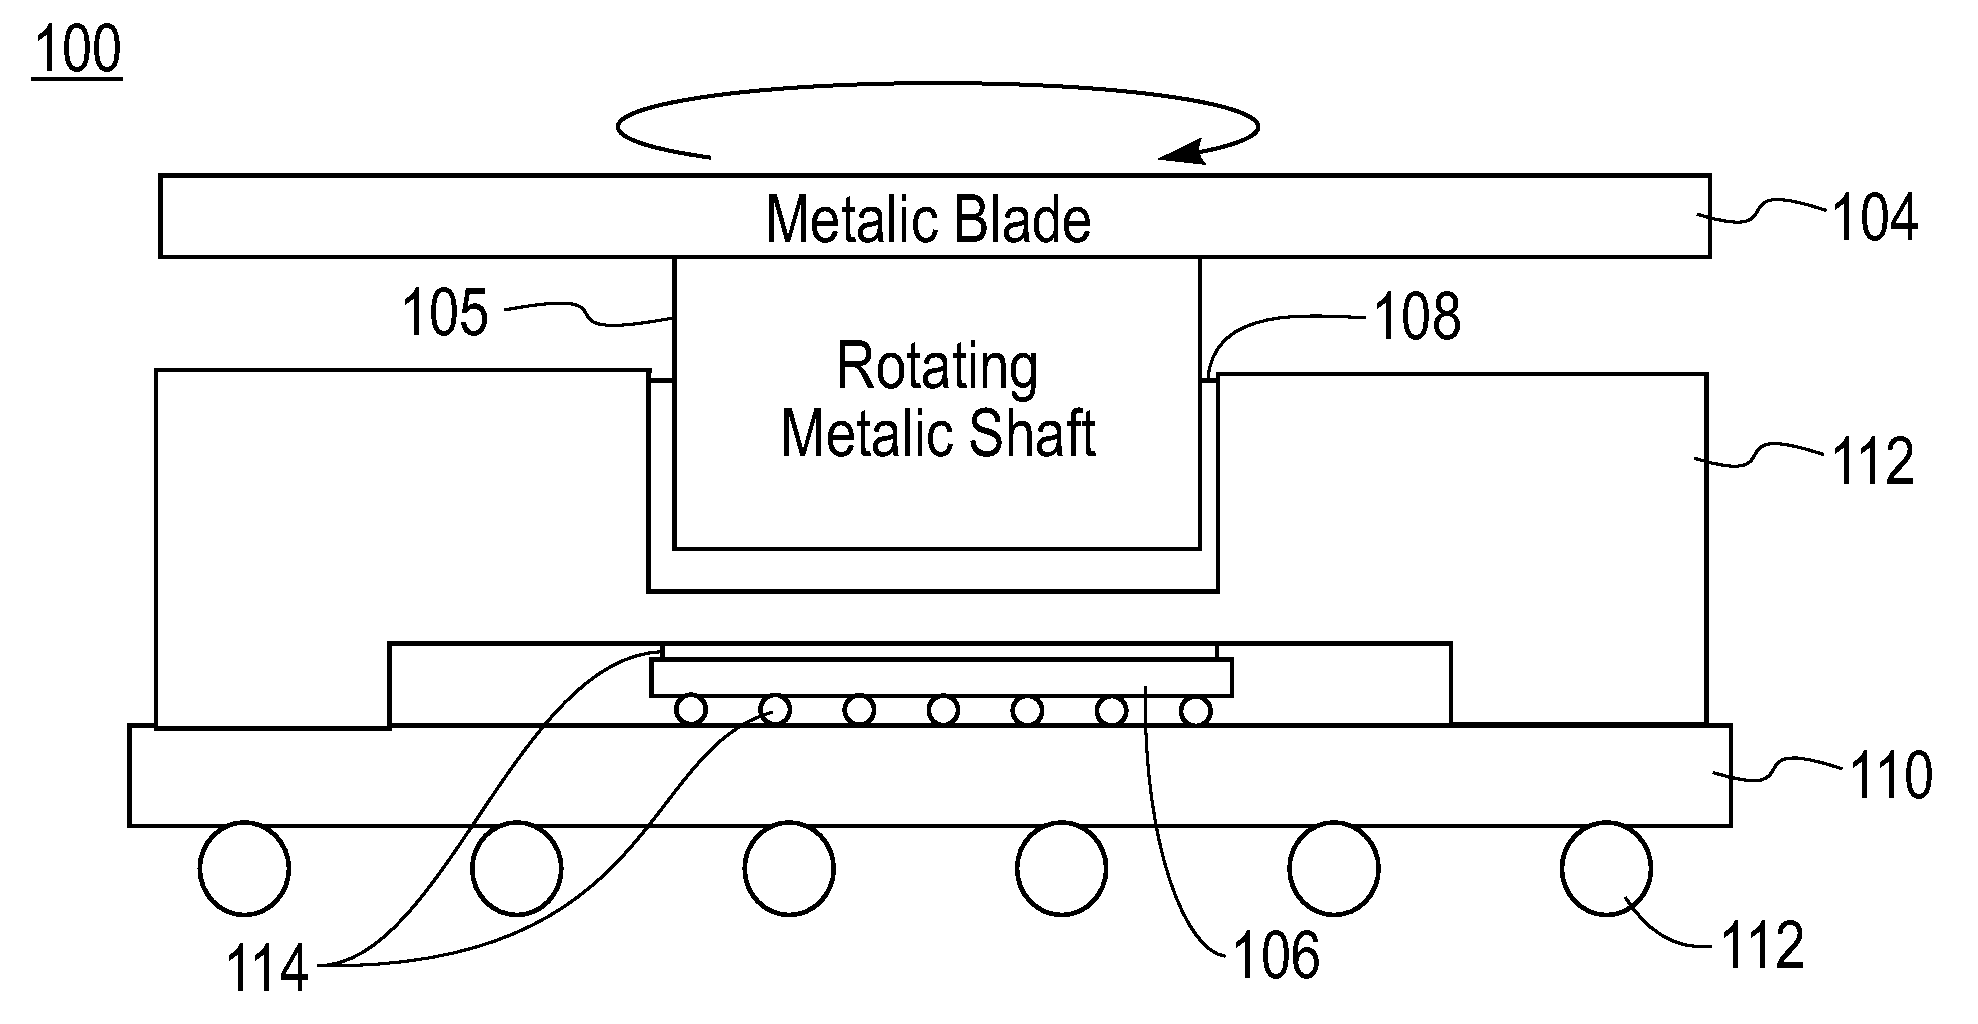 Heat transfer device in a rotating structure